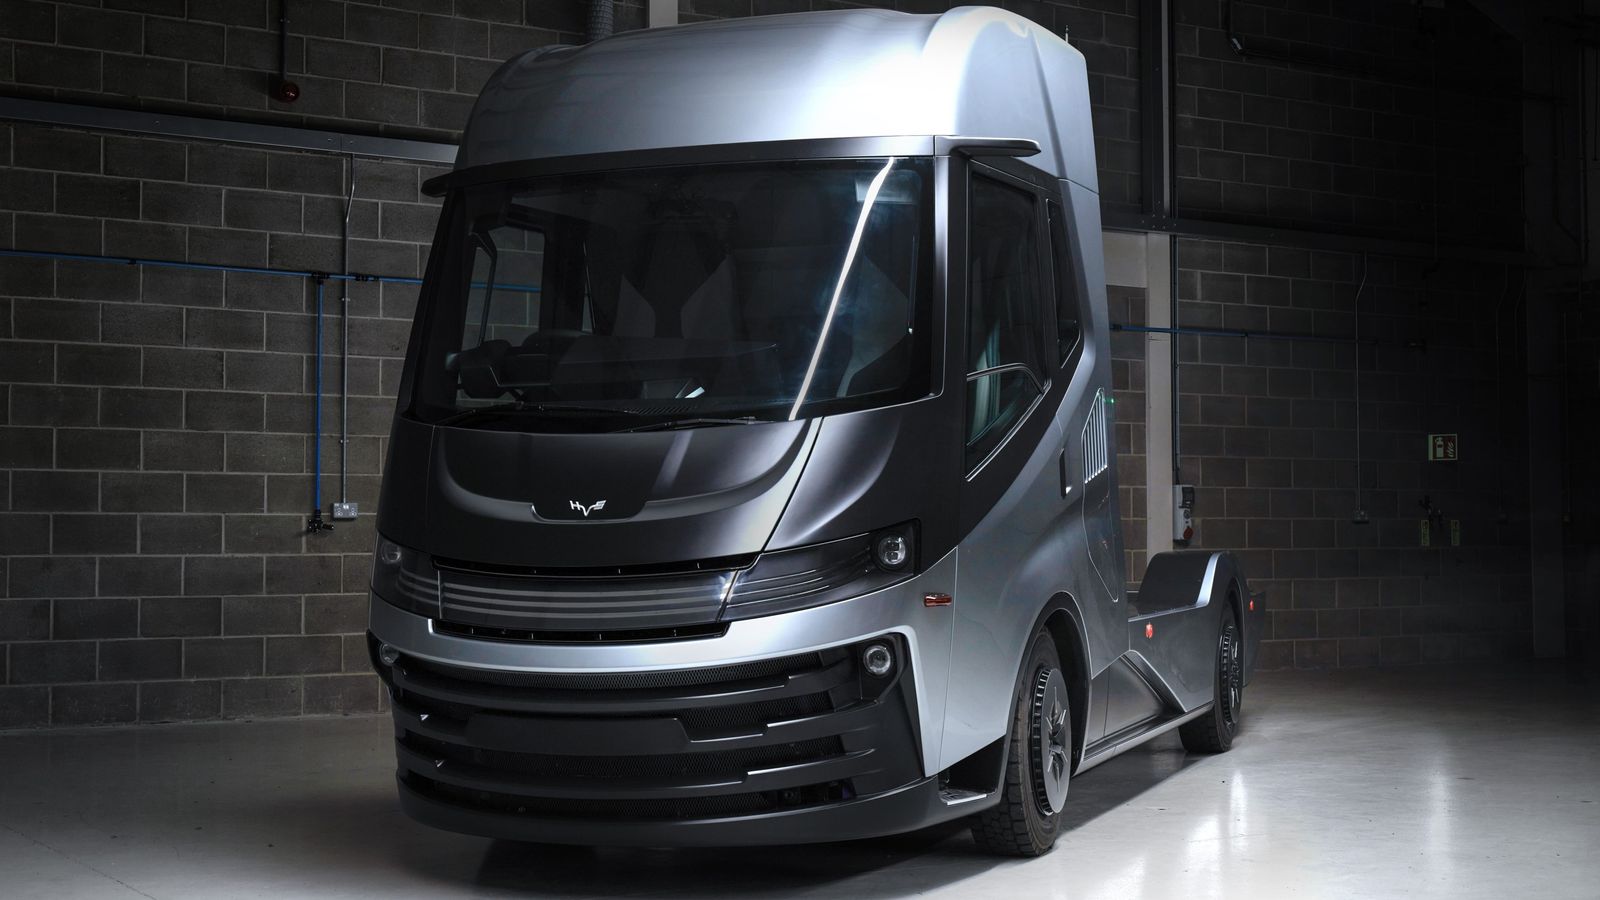 Asda and HVS to work on driverless hydrogen HGV in world first